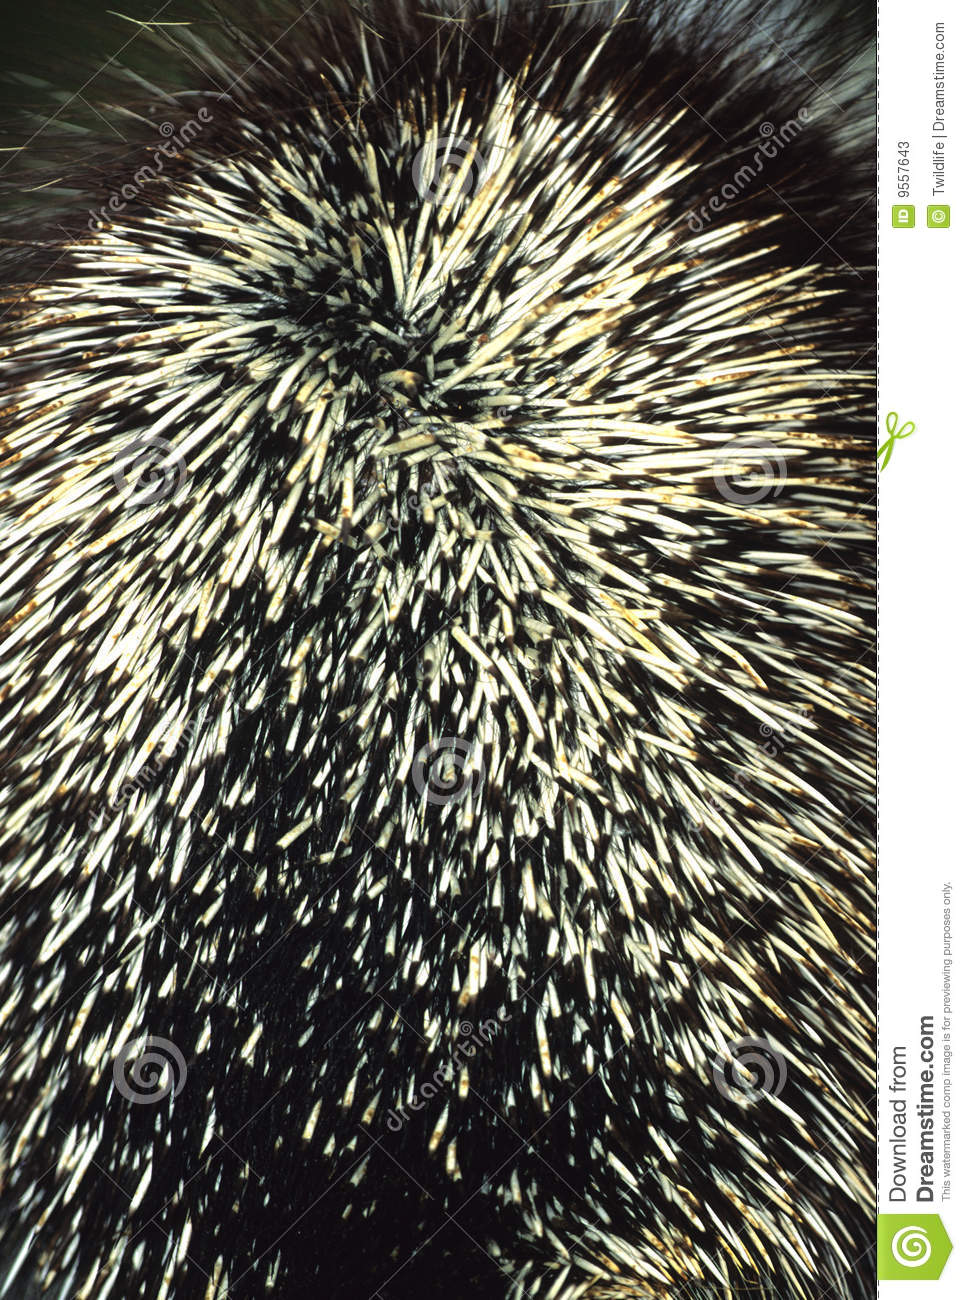 Close Up Of The Rear End Of A Porcupine With Quills Forming A Pattern